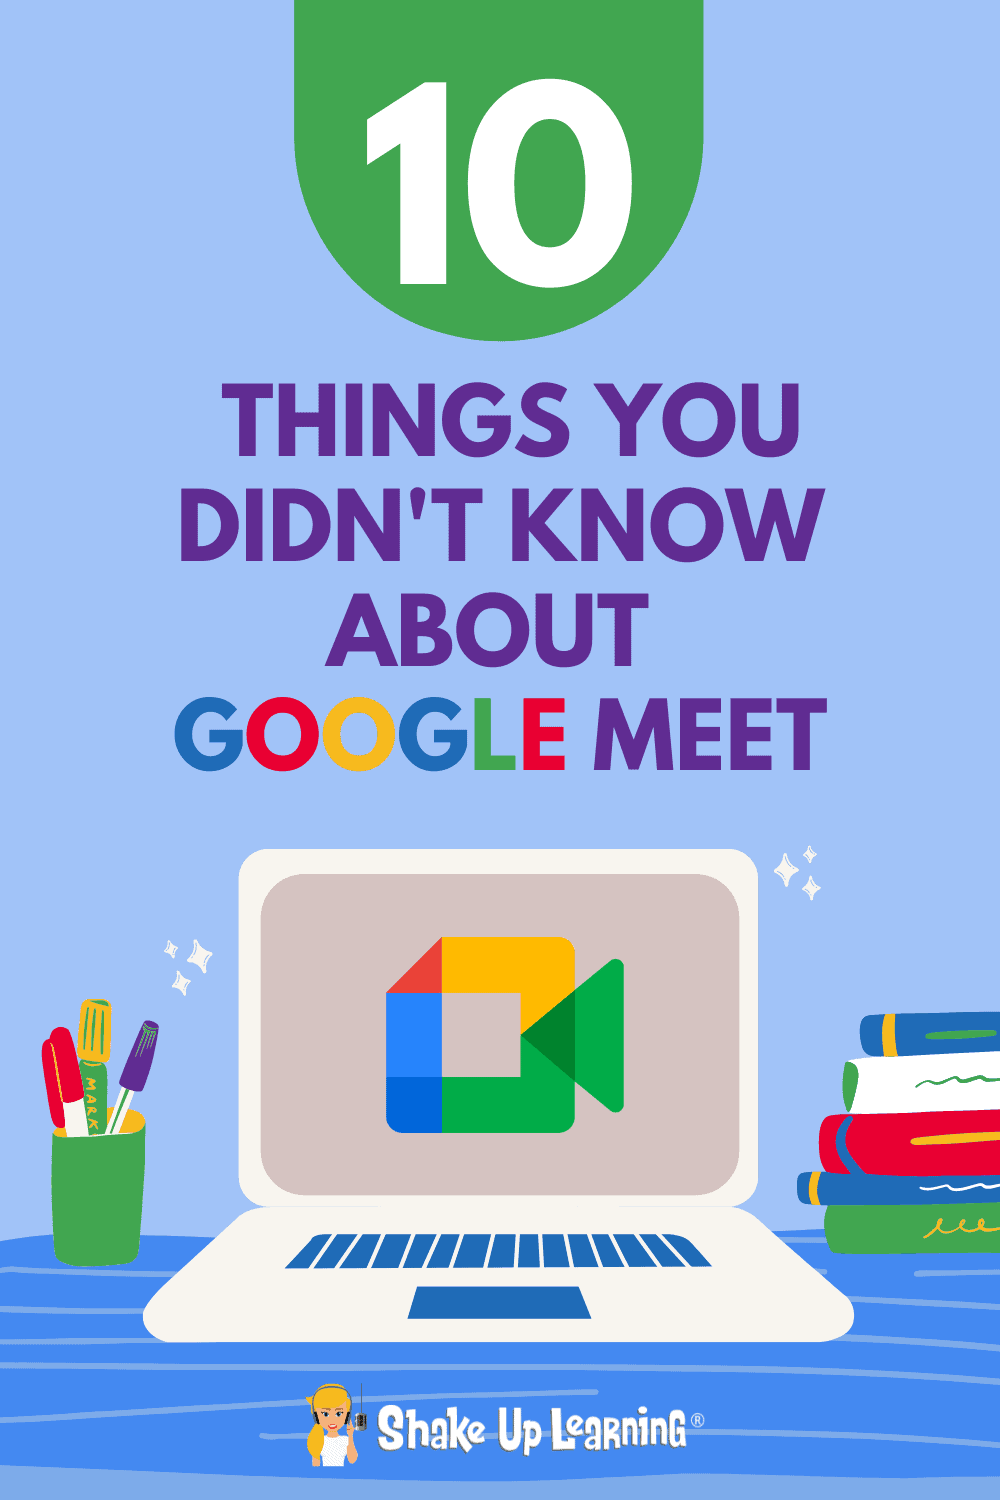 10 Things You Didn't Know About Google Meet - SULS0110